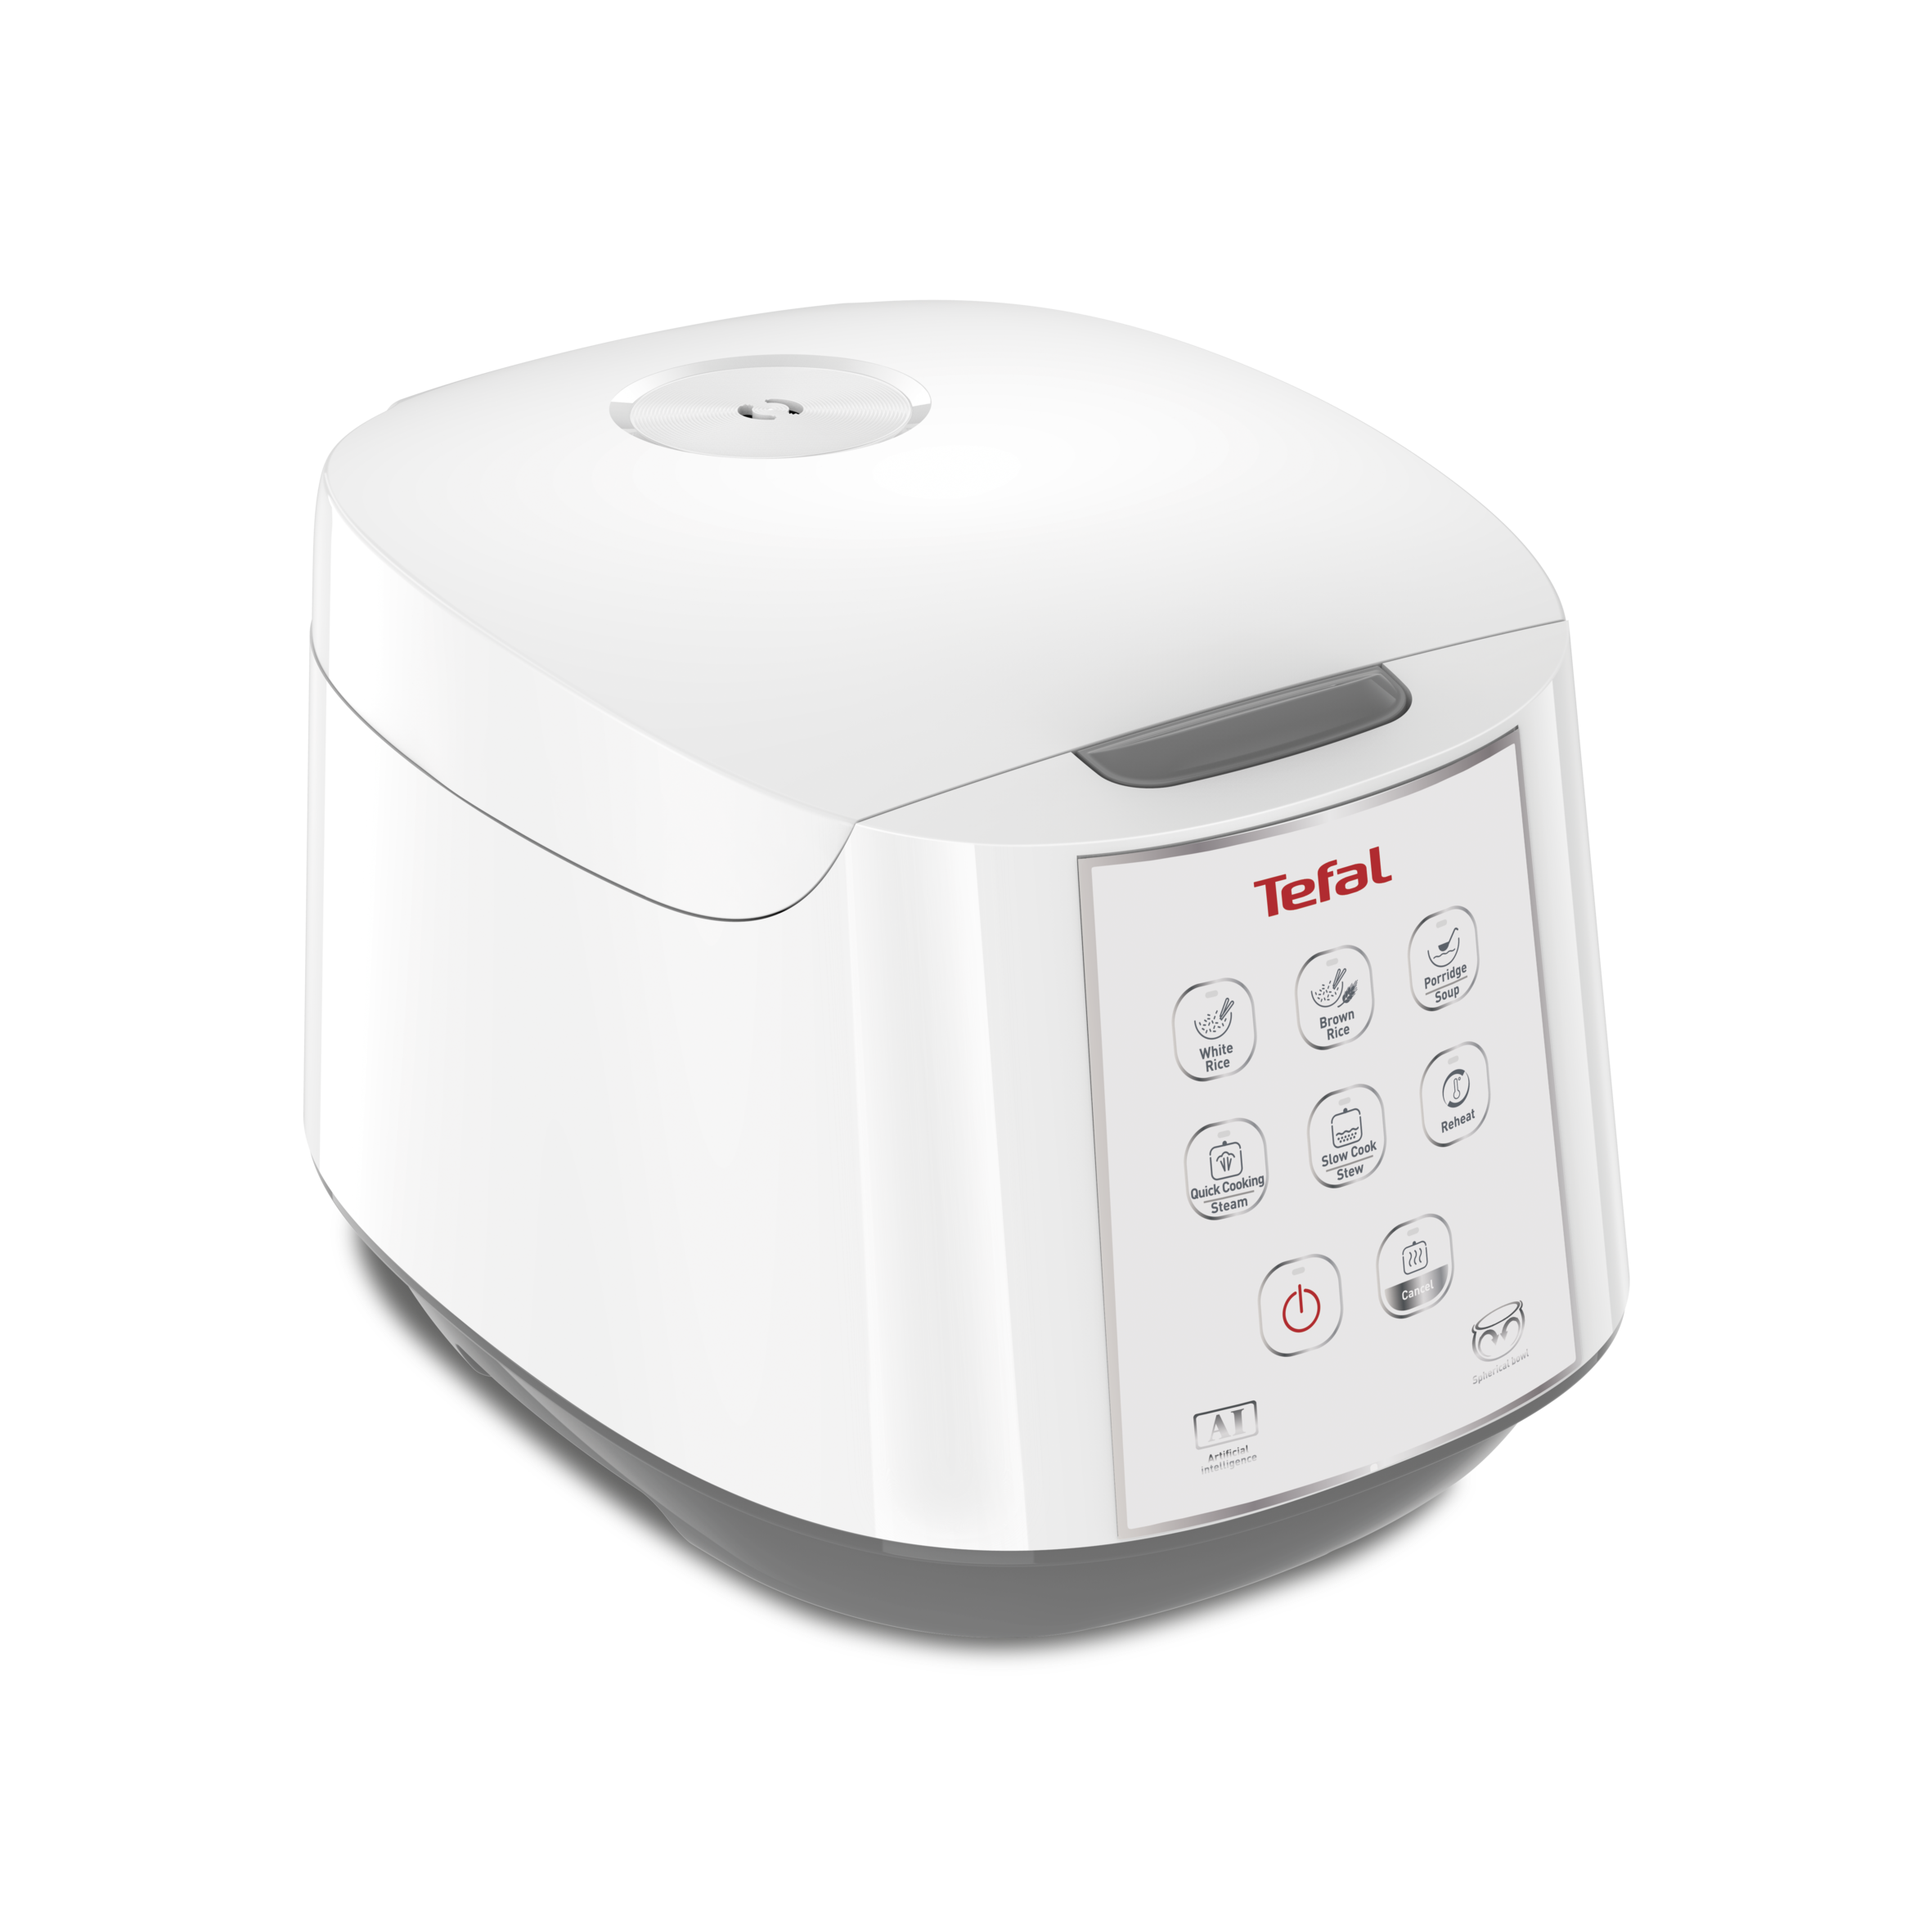 Tefal Easy Rice & Slow Cooker RK732 Rice and Multicooker